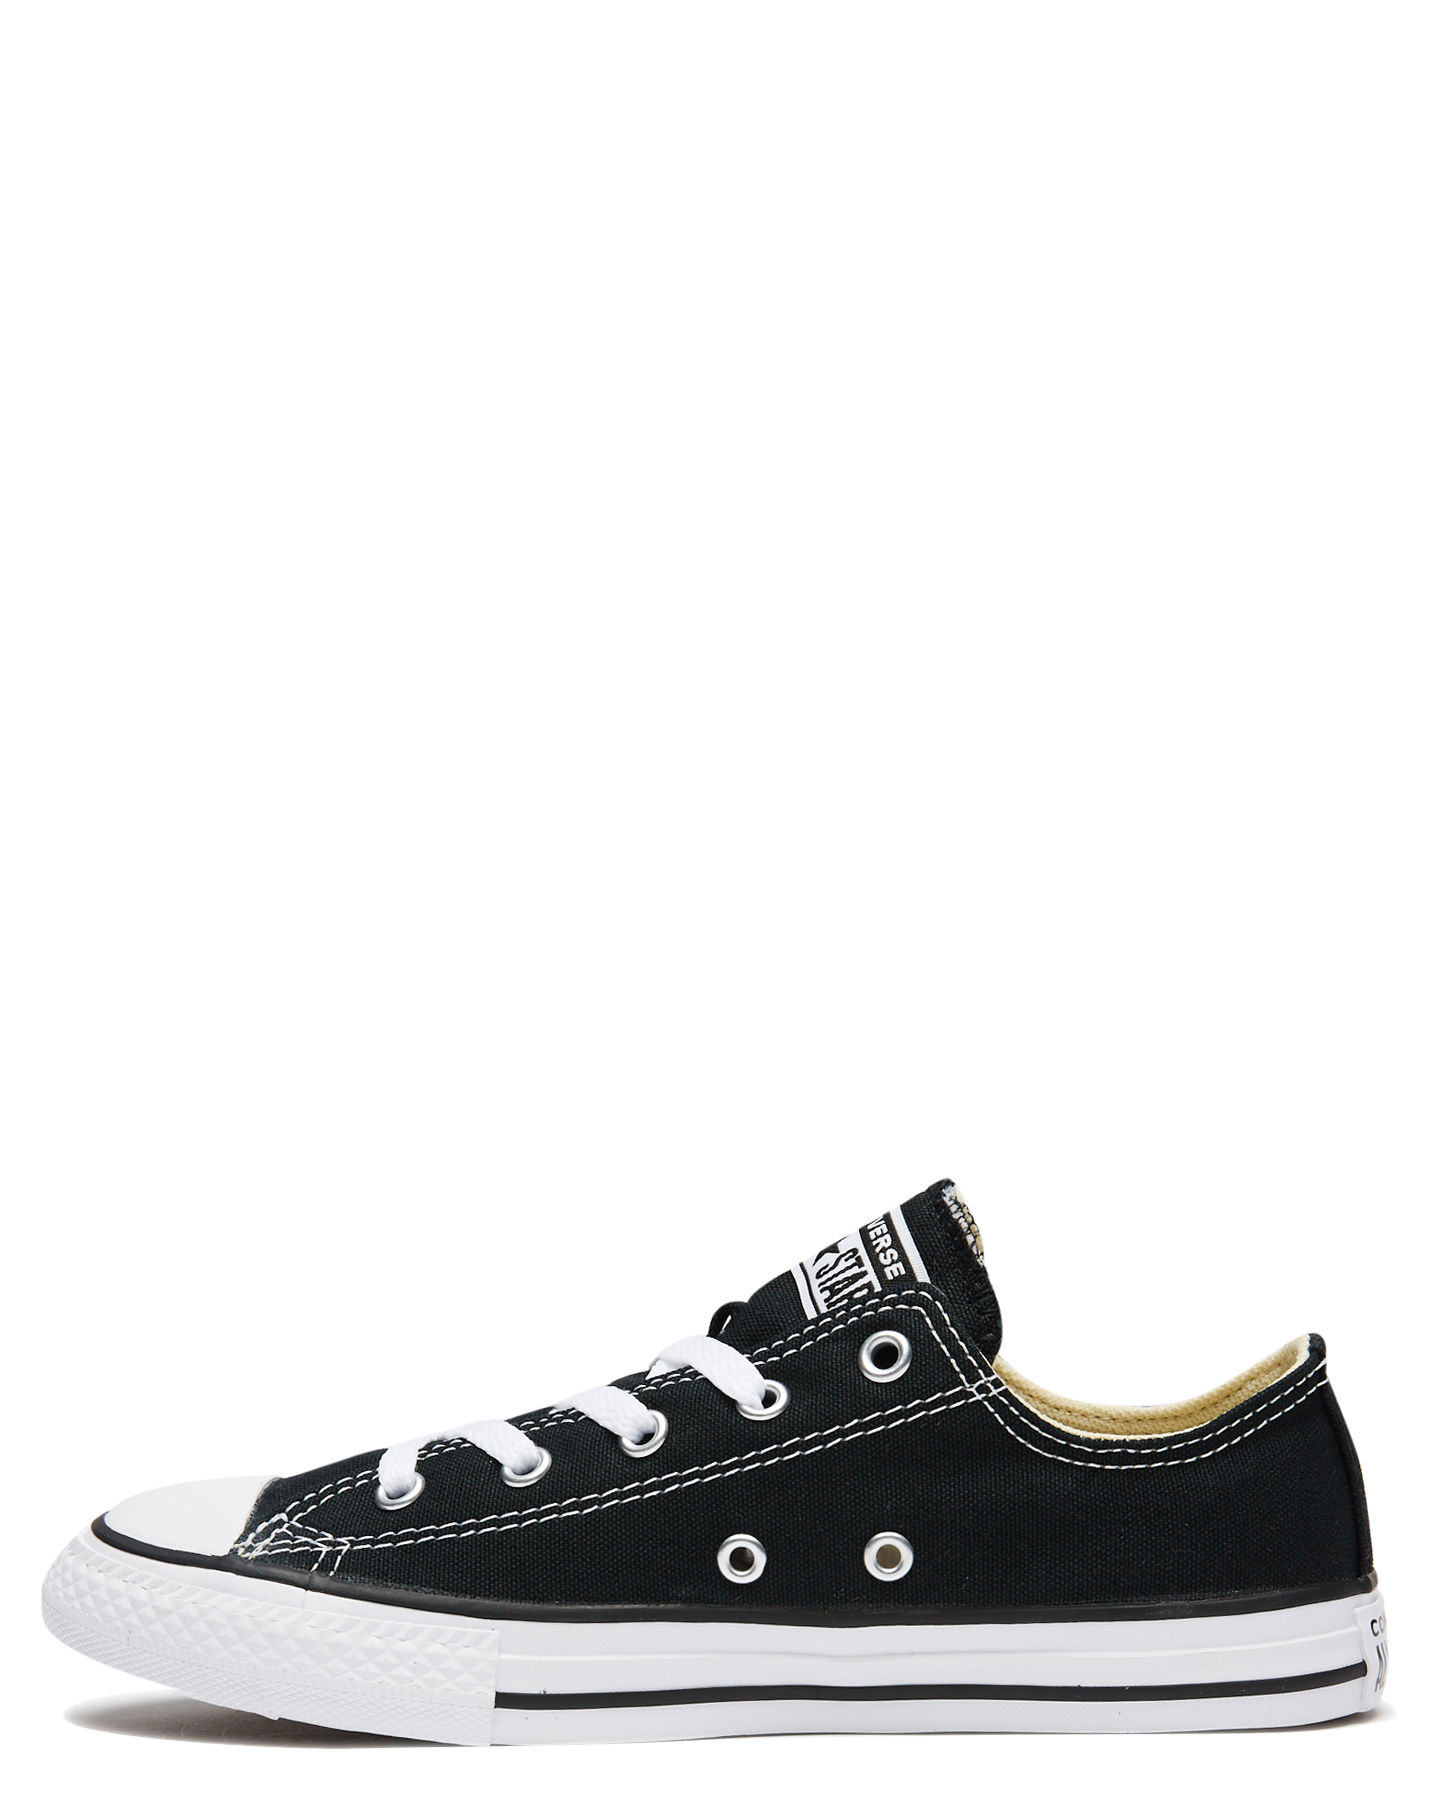 Converse Chuck Taylor All Star Lo Shoe - Youth - Black | SurfStitch